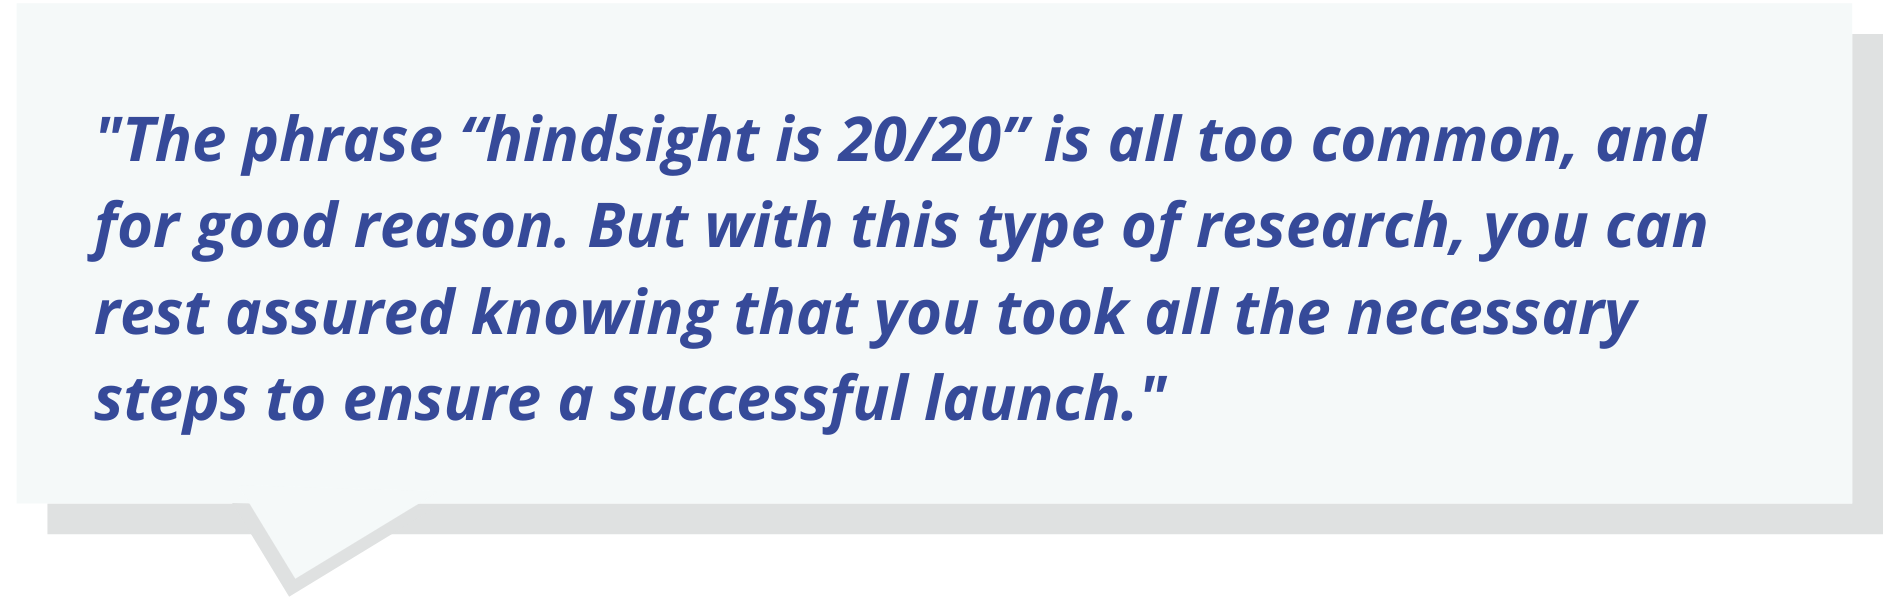 Quote text: The phrase “hindsight is 20/20” is all too common, and for good reason. But with this type of research, you can rest assured knowing that you took all the necessary steps to ensure a successful launch.